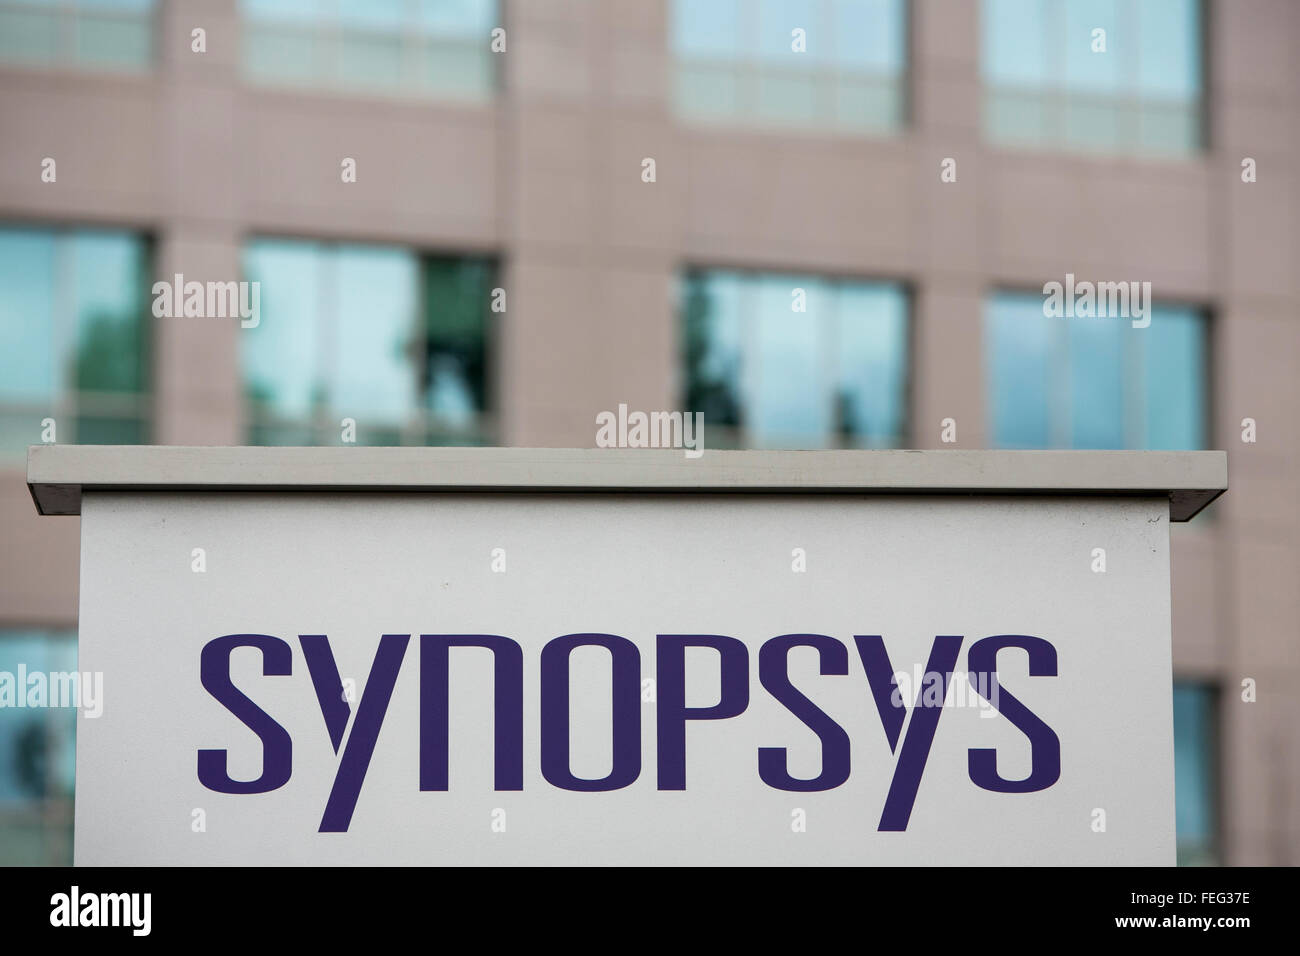 14 Synopsys Inc Images, Stock Photos & Vectors | Shutterstock